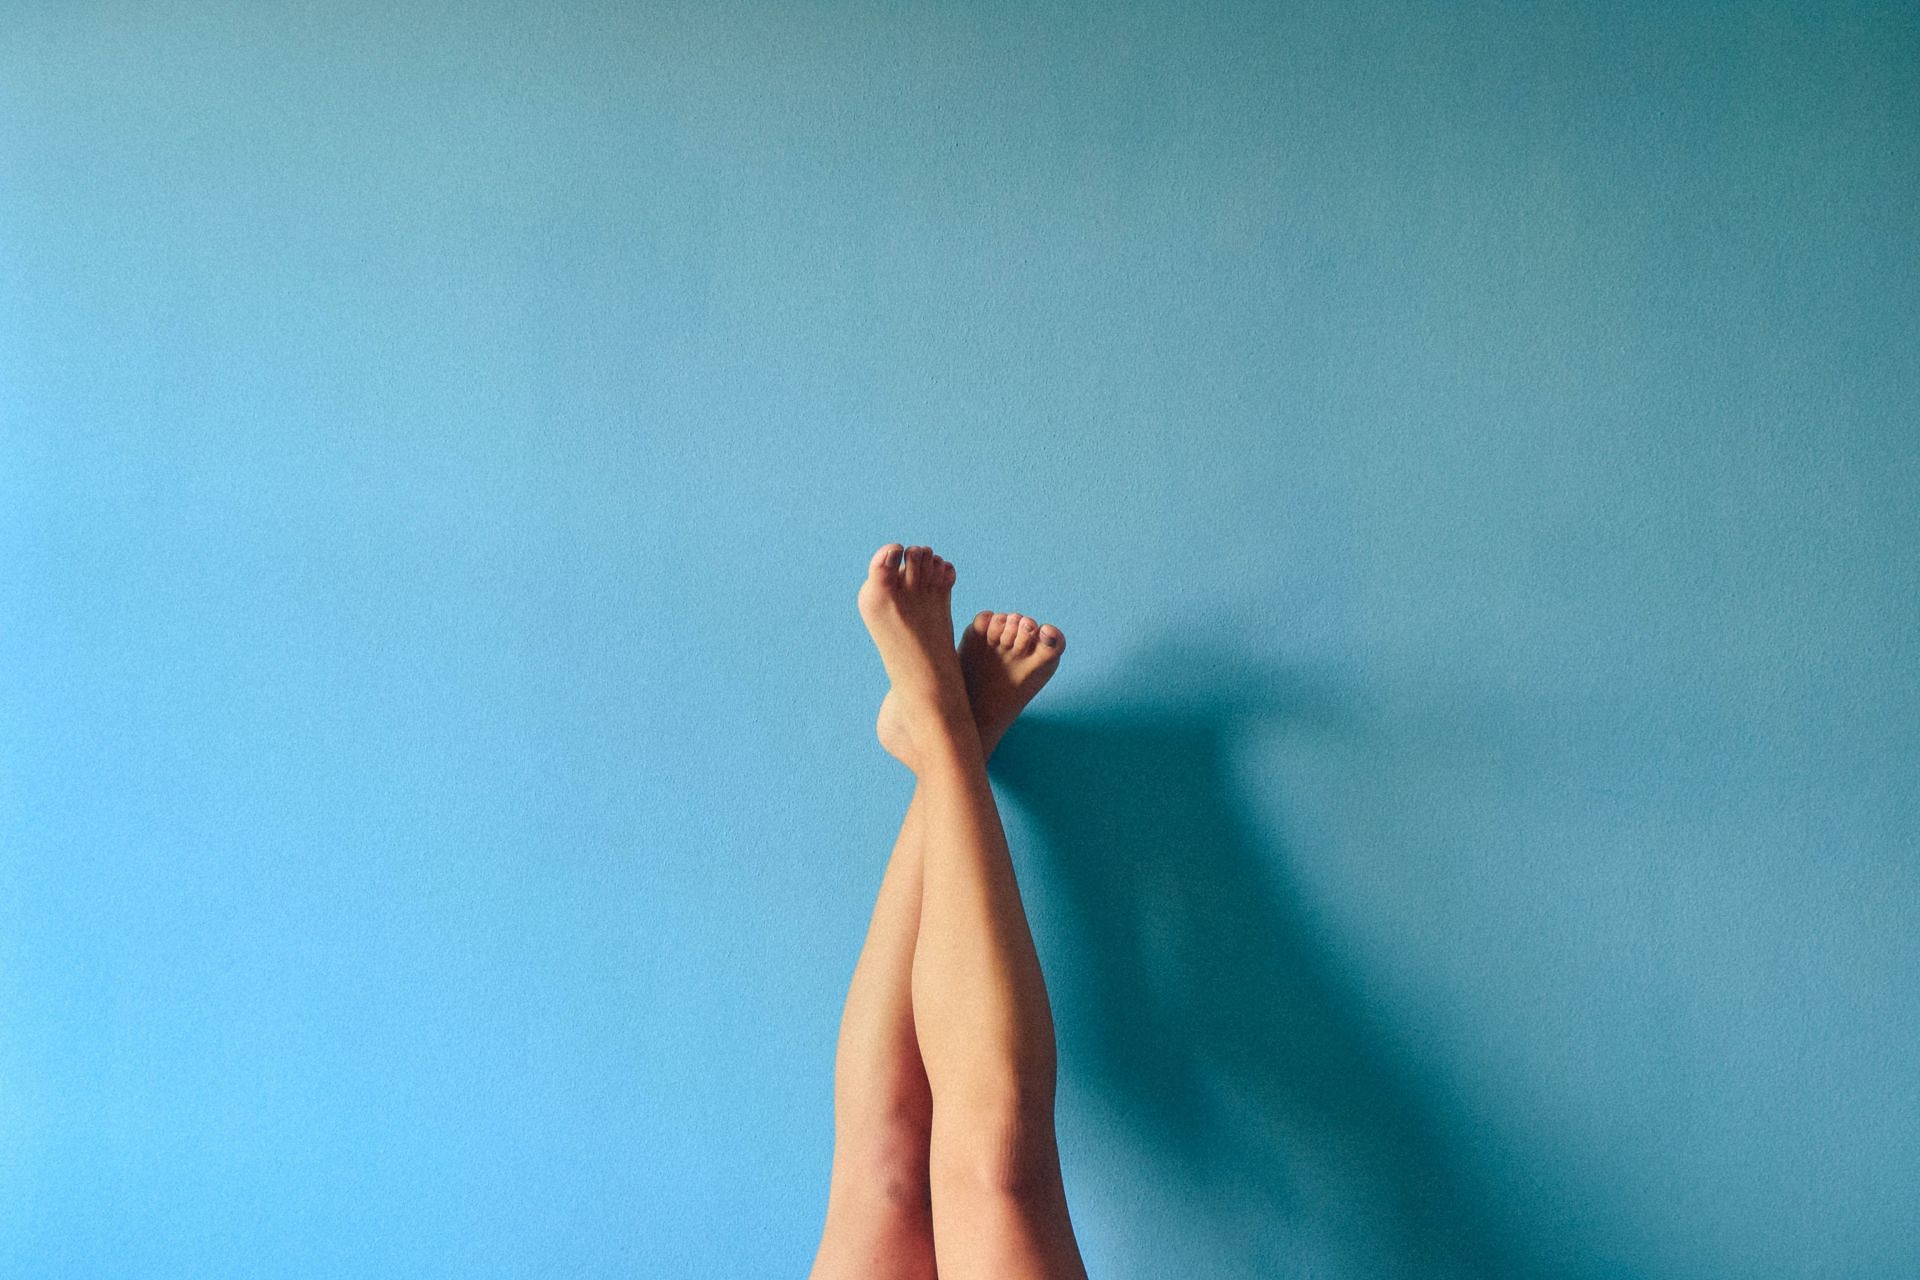 Helps in strengthening your lower body. (Image via Unsplash / Lucrezia Camelos)